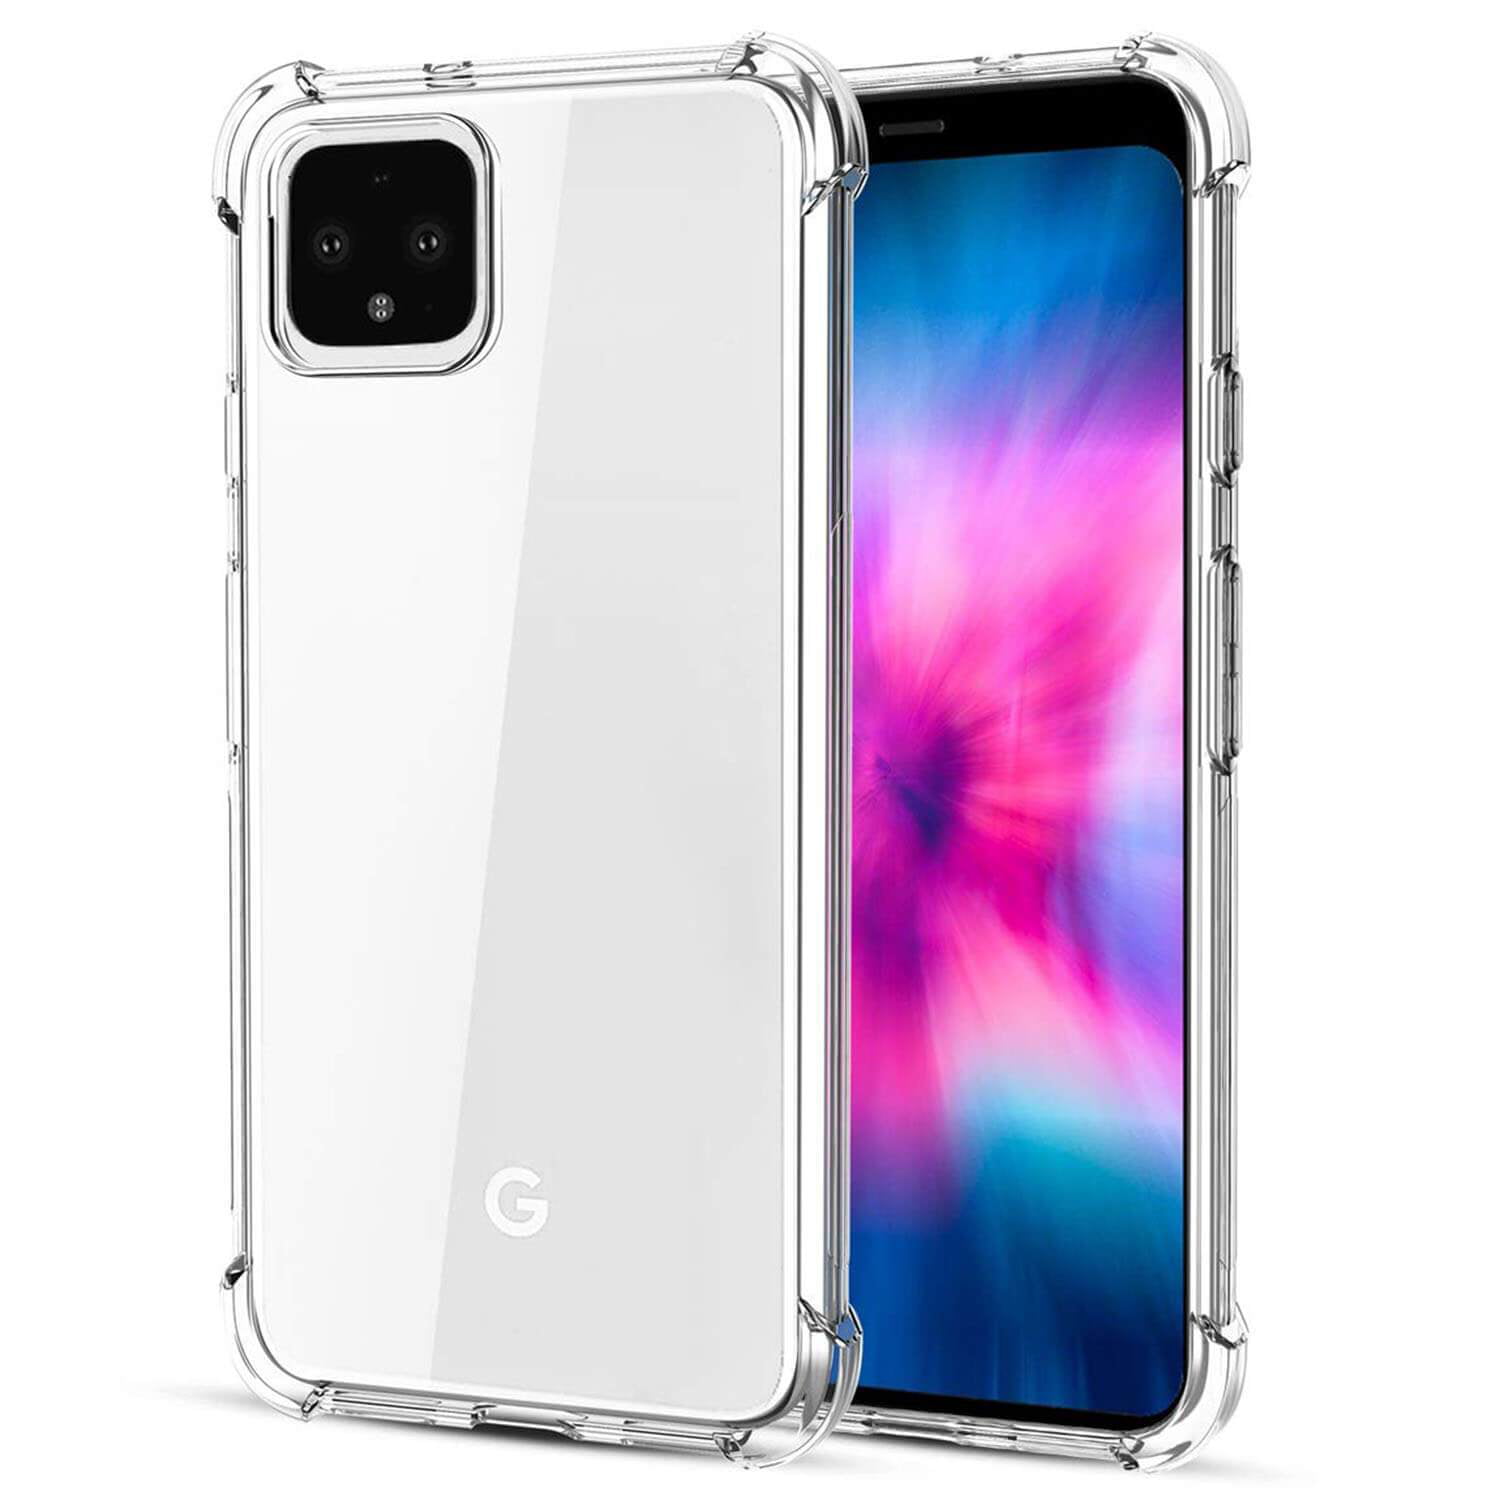 Details about   Thin Soft TPU Silicone Jelly Bumper Back Cover Case for Google Pixel 2 XL 